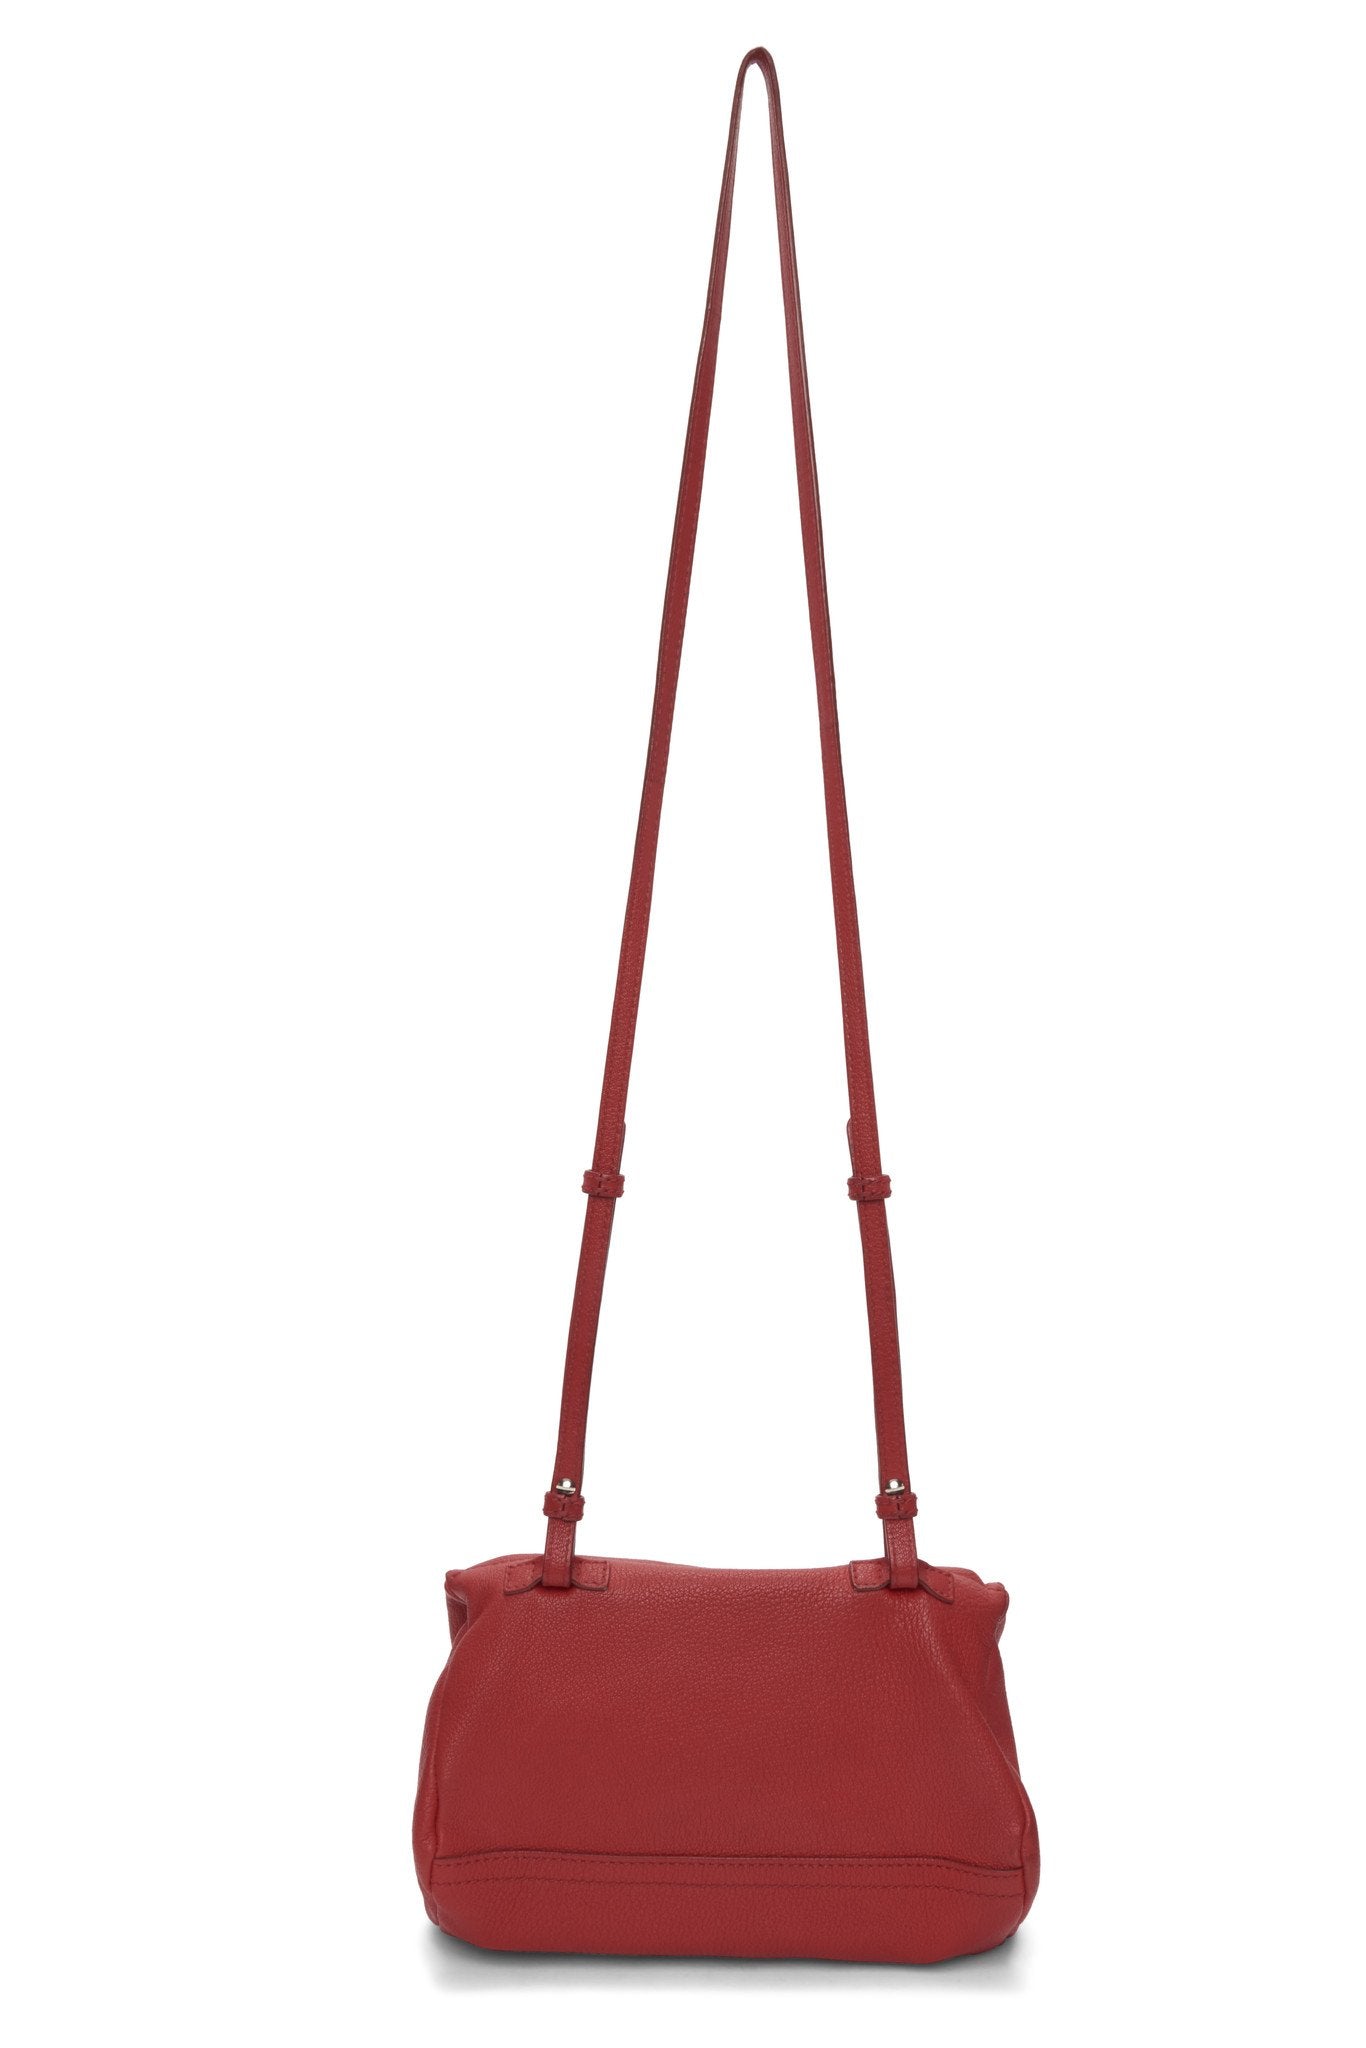 Givenchy Red Grained Leather Mini Pandora Crossbody